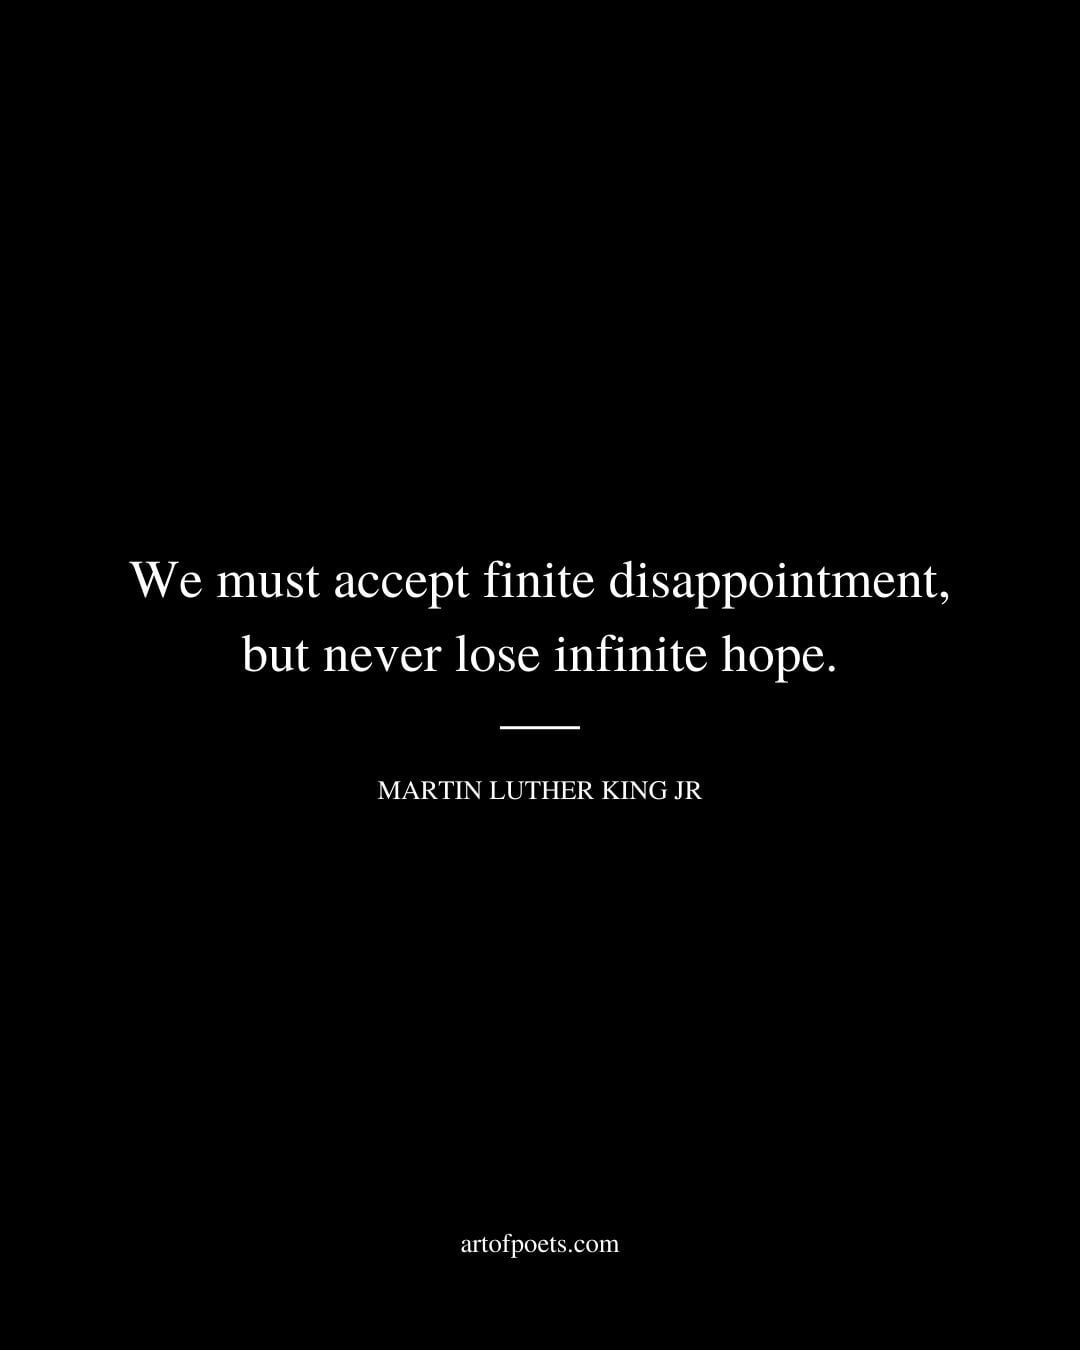 We must accept finite disappointment but never lose infinite hope. Martin Luther King Jr